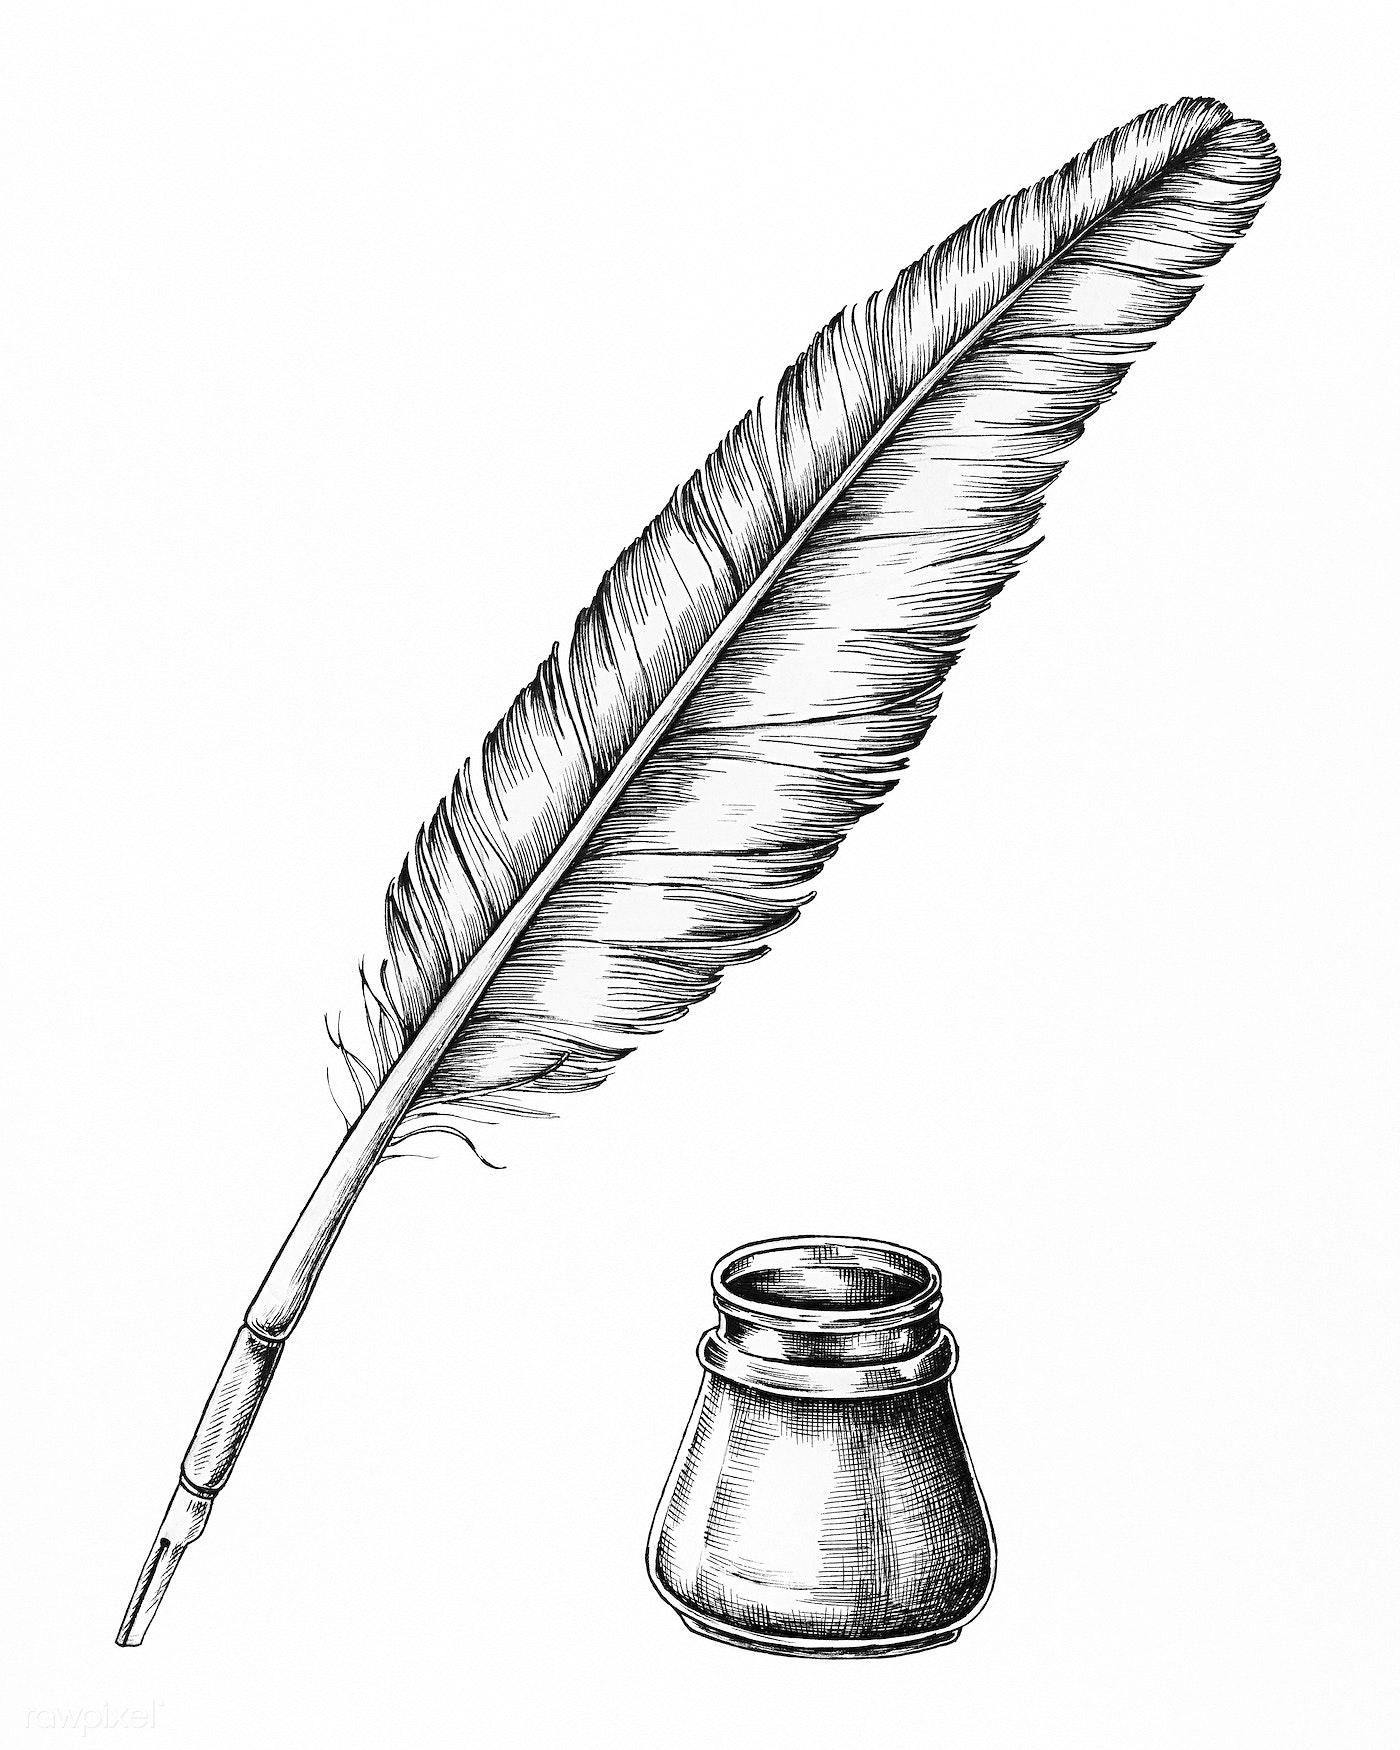 Feather Drawing Photo